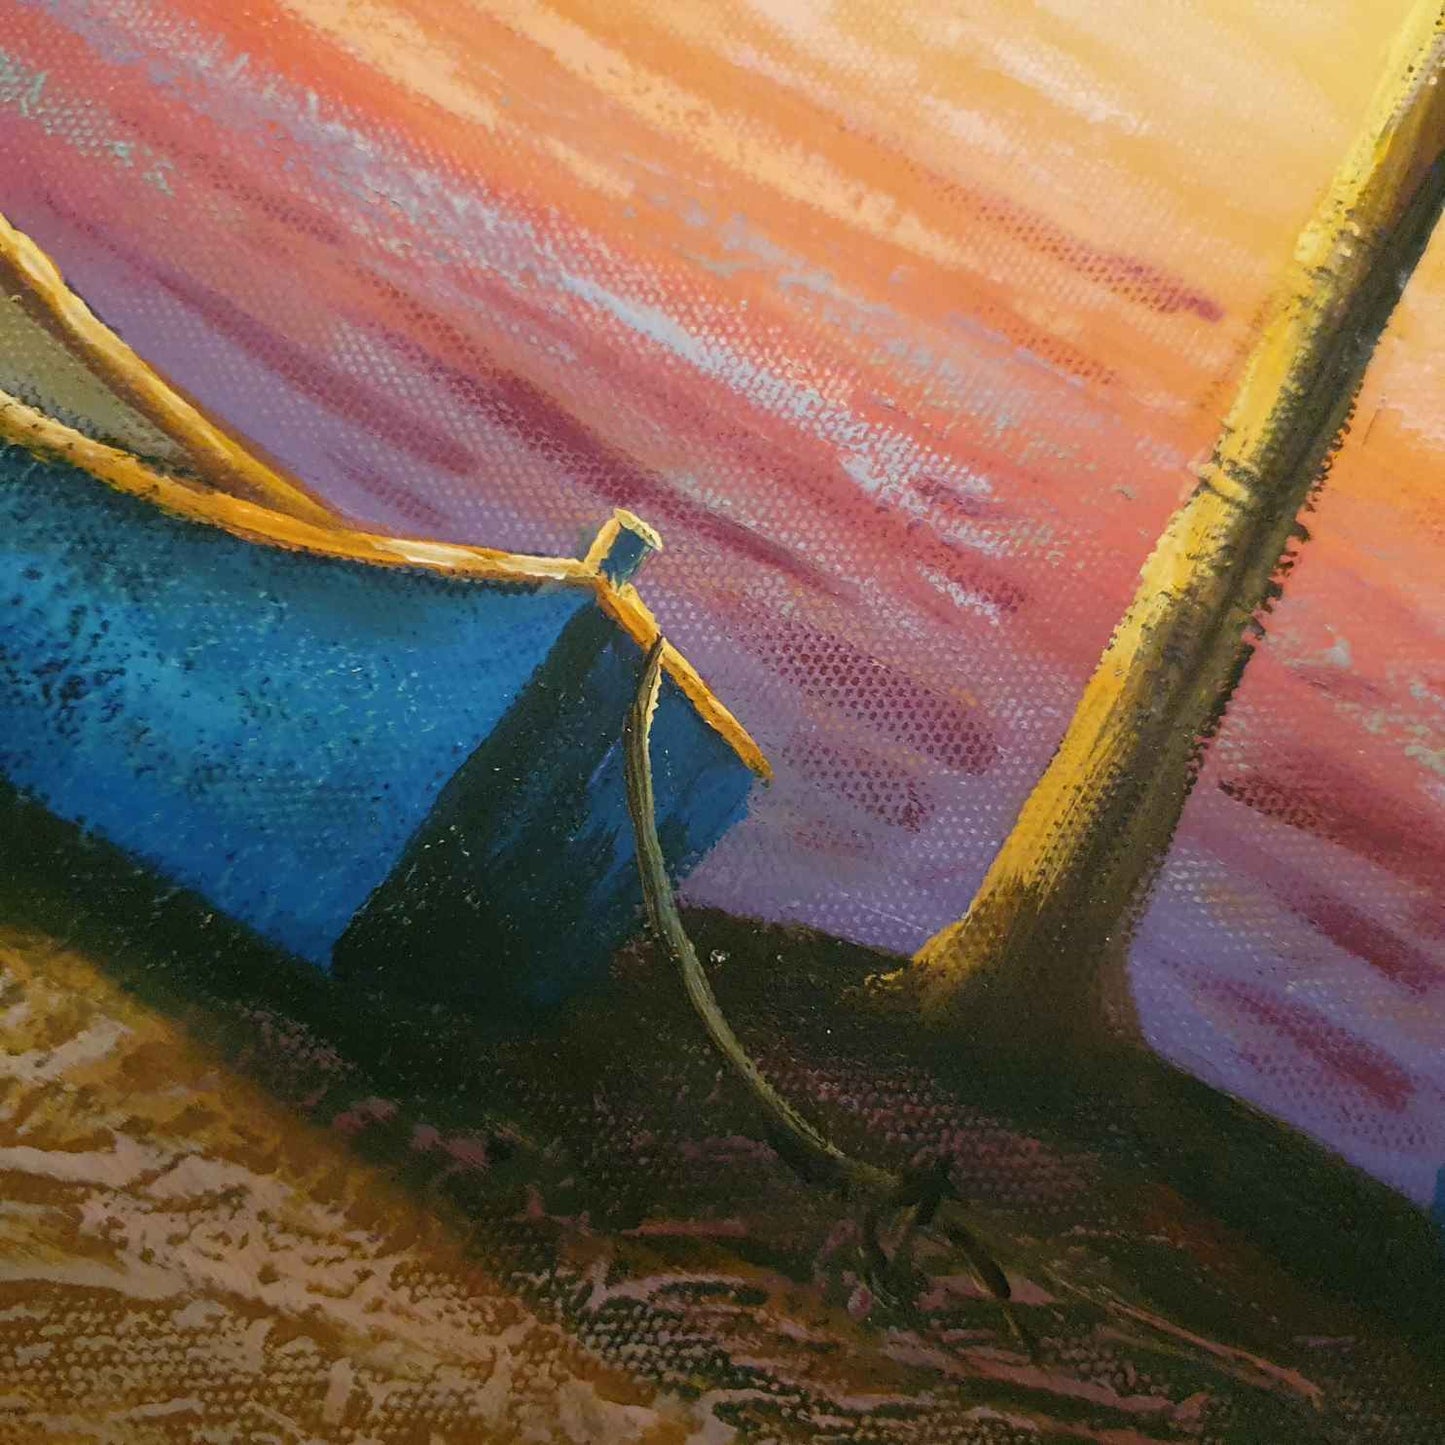 Painting the Palm Trees by the Sea 90x60 cm